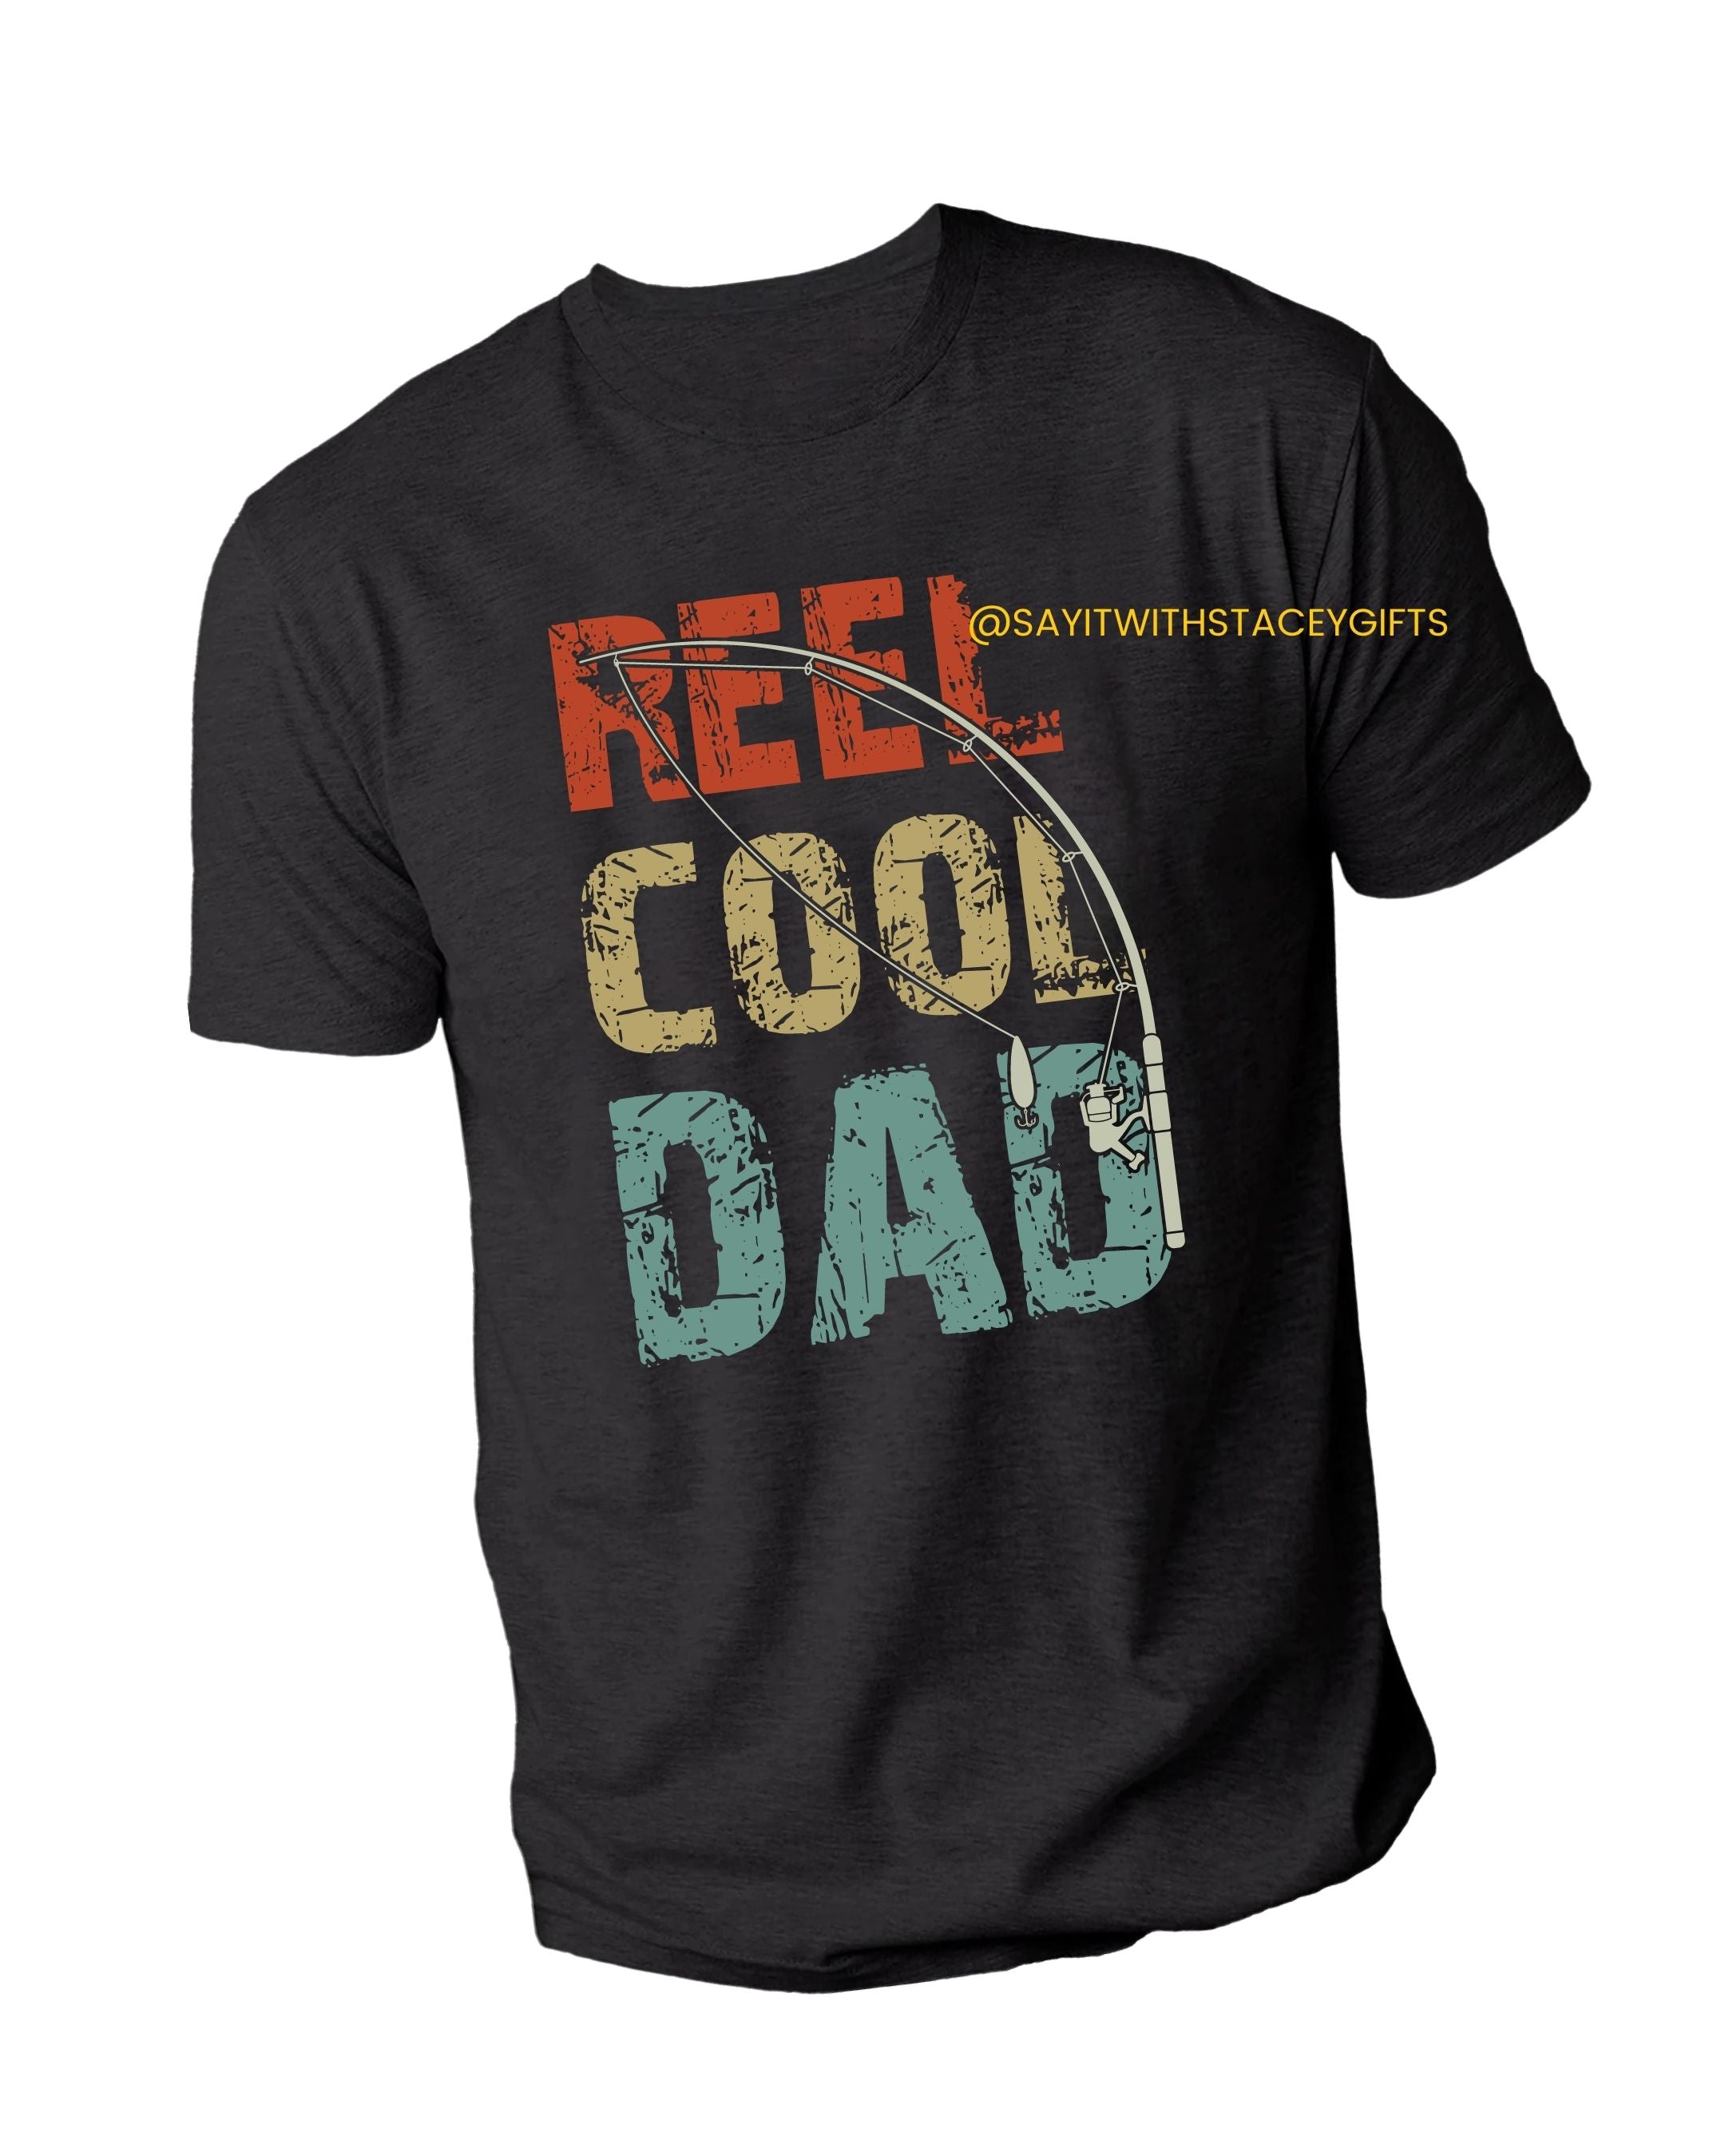 Reel Cool Dad, Reel Life Shirts, Dad Fishing Apparel - Print your thoughts.  Tell your stories.